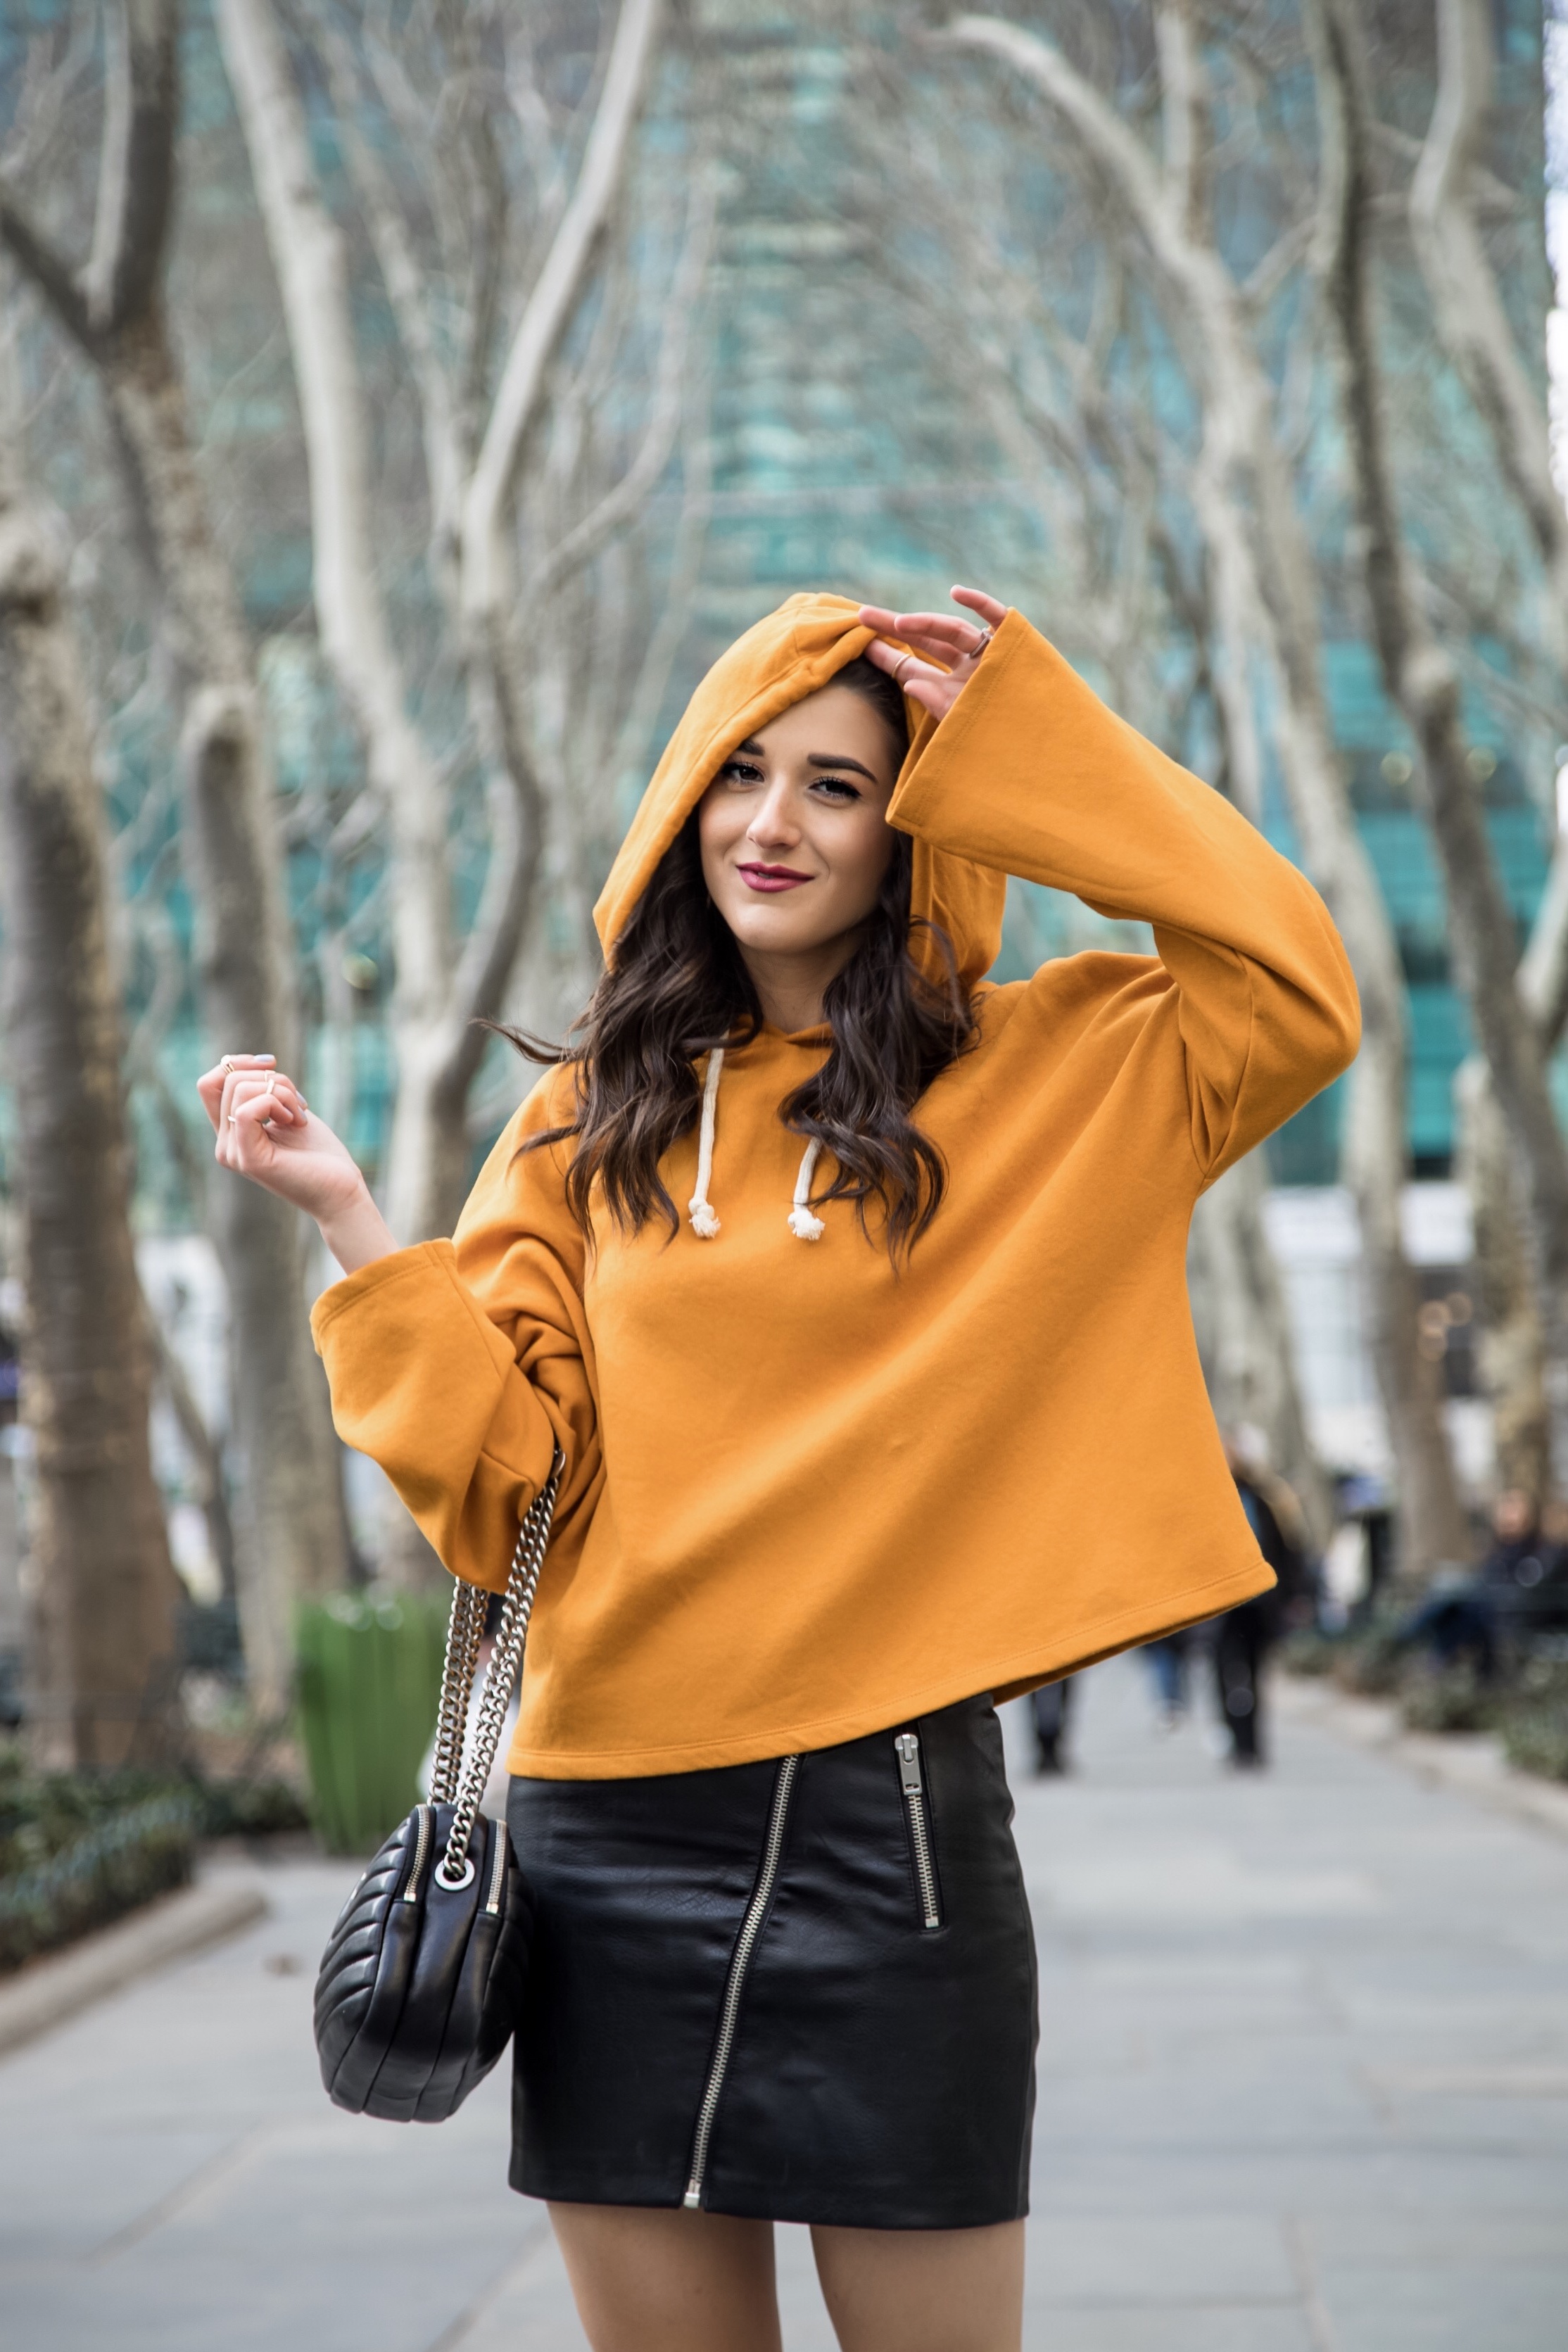 How Blogging Affected My Self Confidence Yellow Sweatshirt Black Pleather Skirt Esther Santer Fashion Blog NYC Street Style Blogger Outfit OOTD Trendy Zara ASOS Hairstyle Sporty Girly Open Toe Booties Shopping Buy Wear Fall Winter Hood Mustard Color.jpg